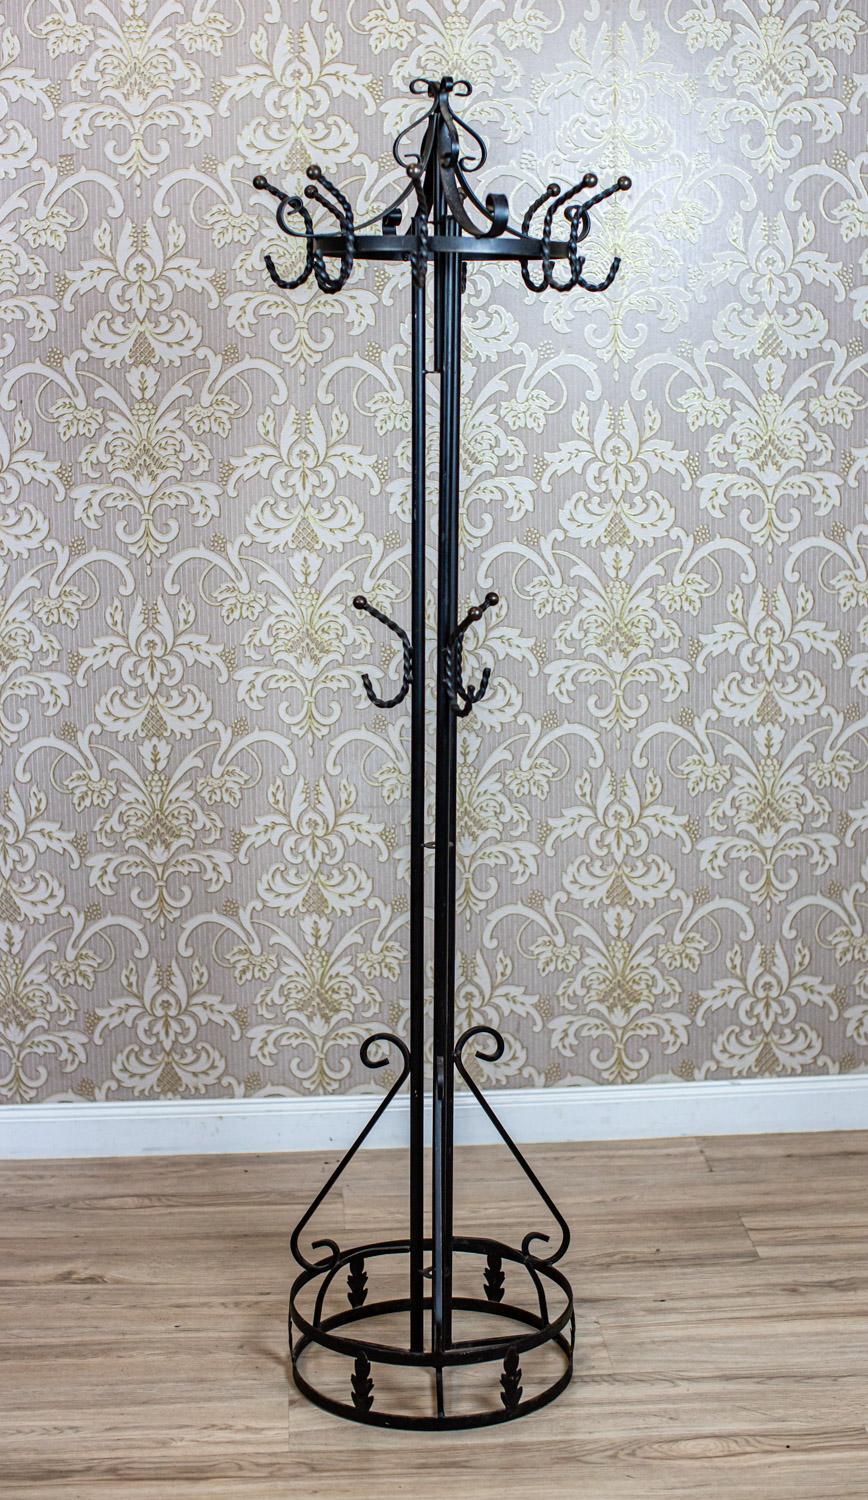 Stylized Metal Coat Stand from the 20th Century

We present you this metal coat stand in incredibly good condition.